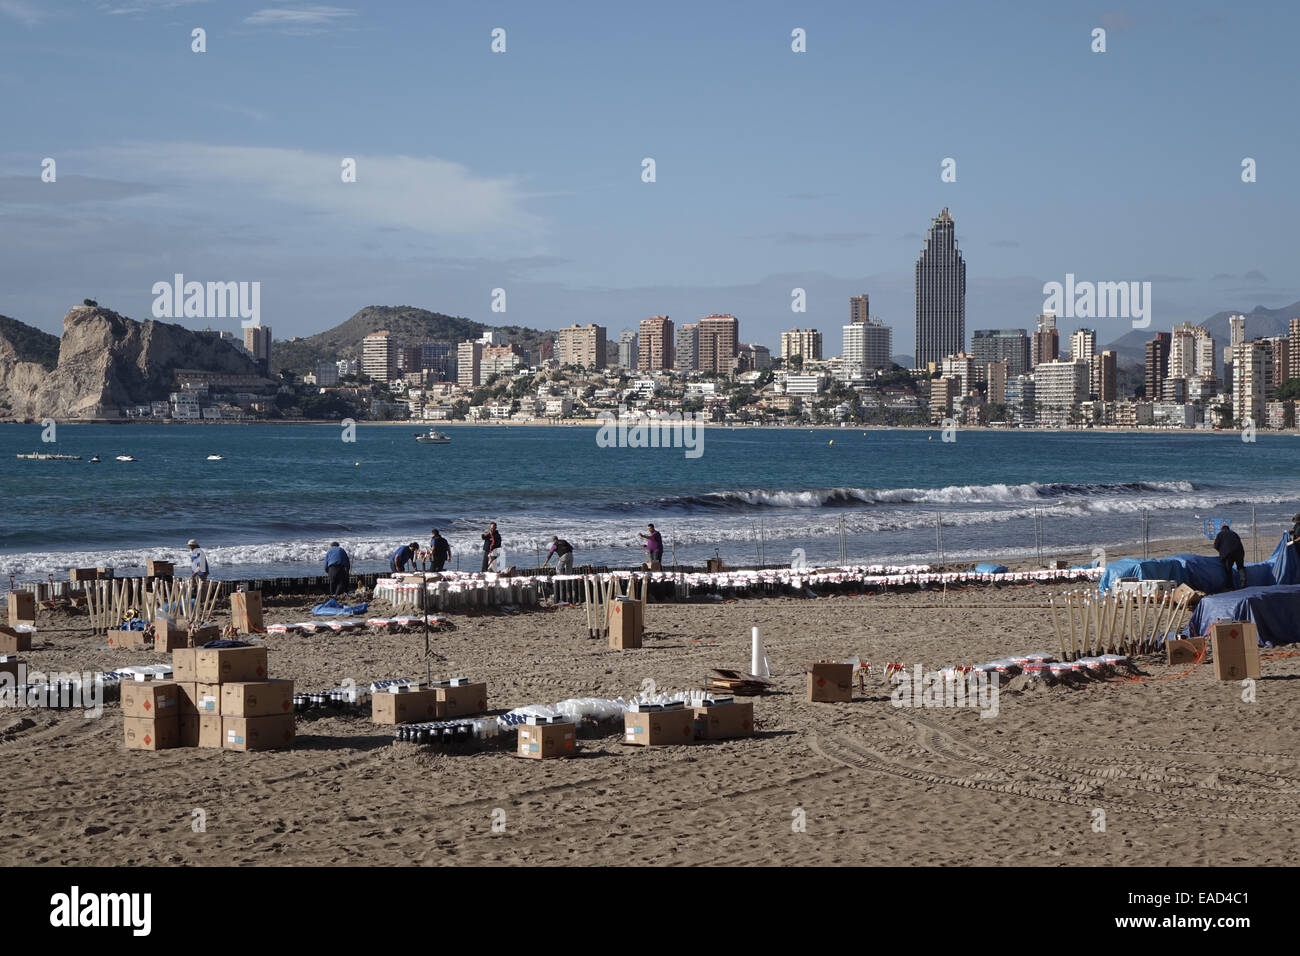 Benidorm, Spain. 12th November, 2014. The preparations for the final, gigantic fireworks spectacular of the Fiesta which happens tonight at 9pm are taking place in clear sunny weather on Poniente beach in Benidorm. Hundreds of explosive charges and mortar tubes which contain the larger fireworks are visible on the tourist beach which is fenced off for the popular event. Credit:  Mick Flynn/Alamy Live News Stock Photo